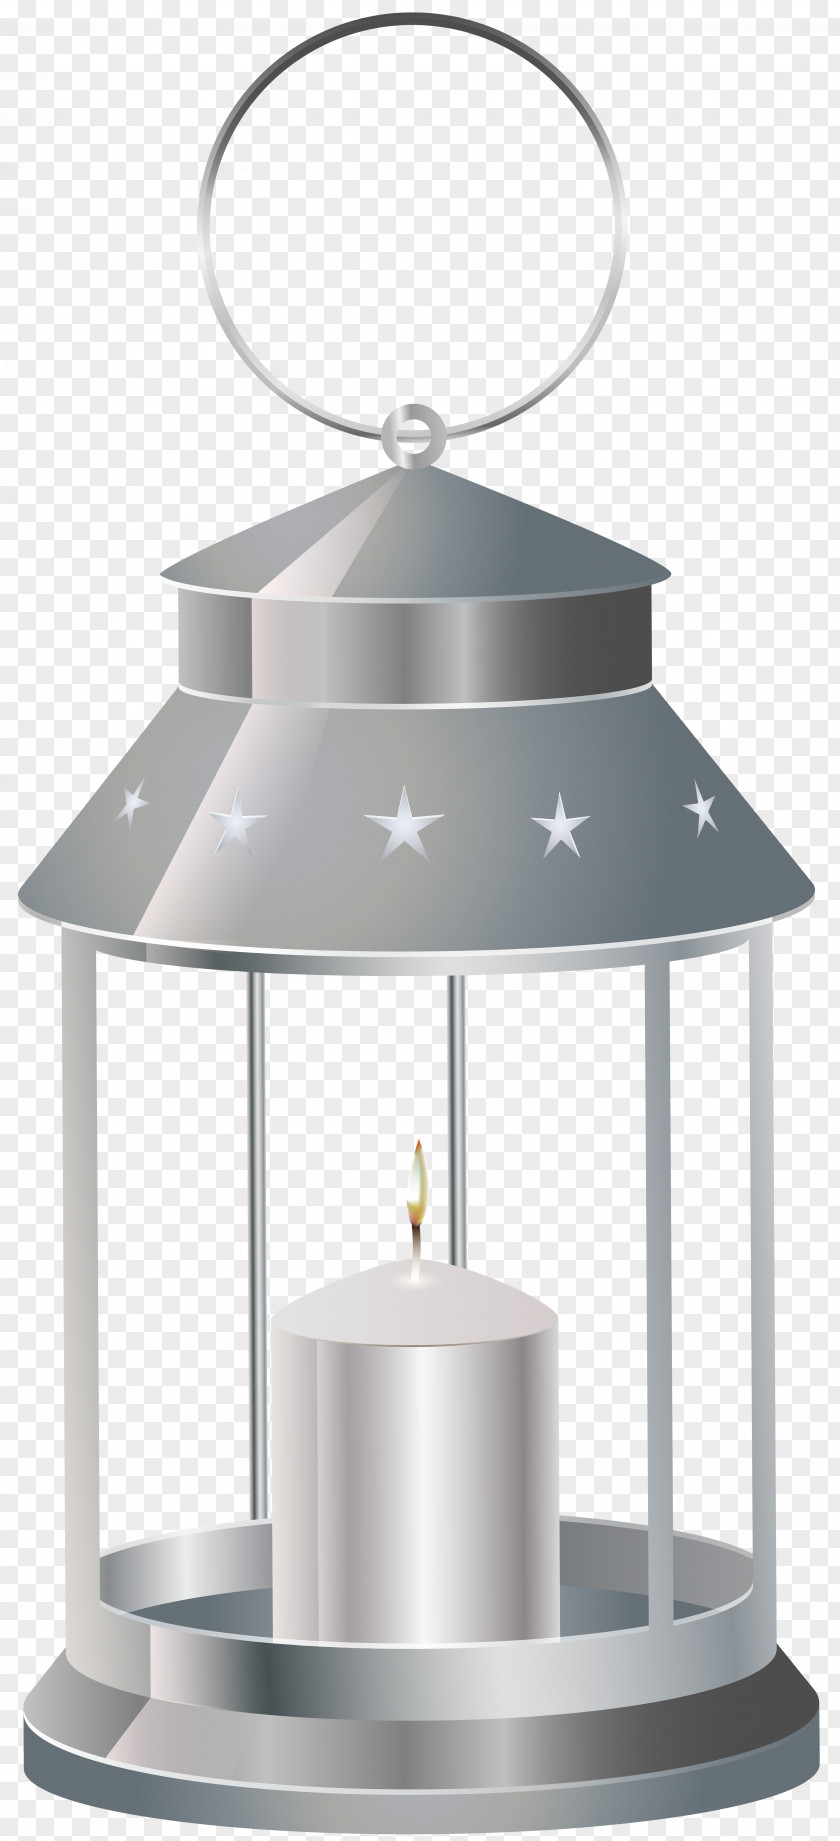 Silver Lantern With Candle Transparent Clip Art Image PNG